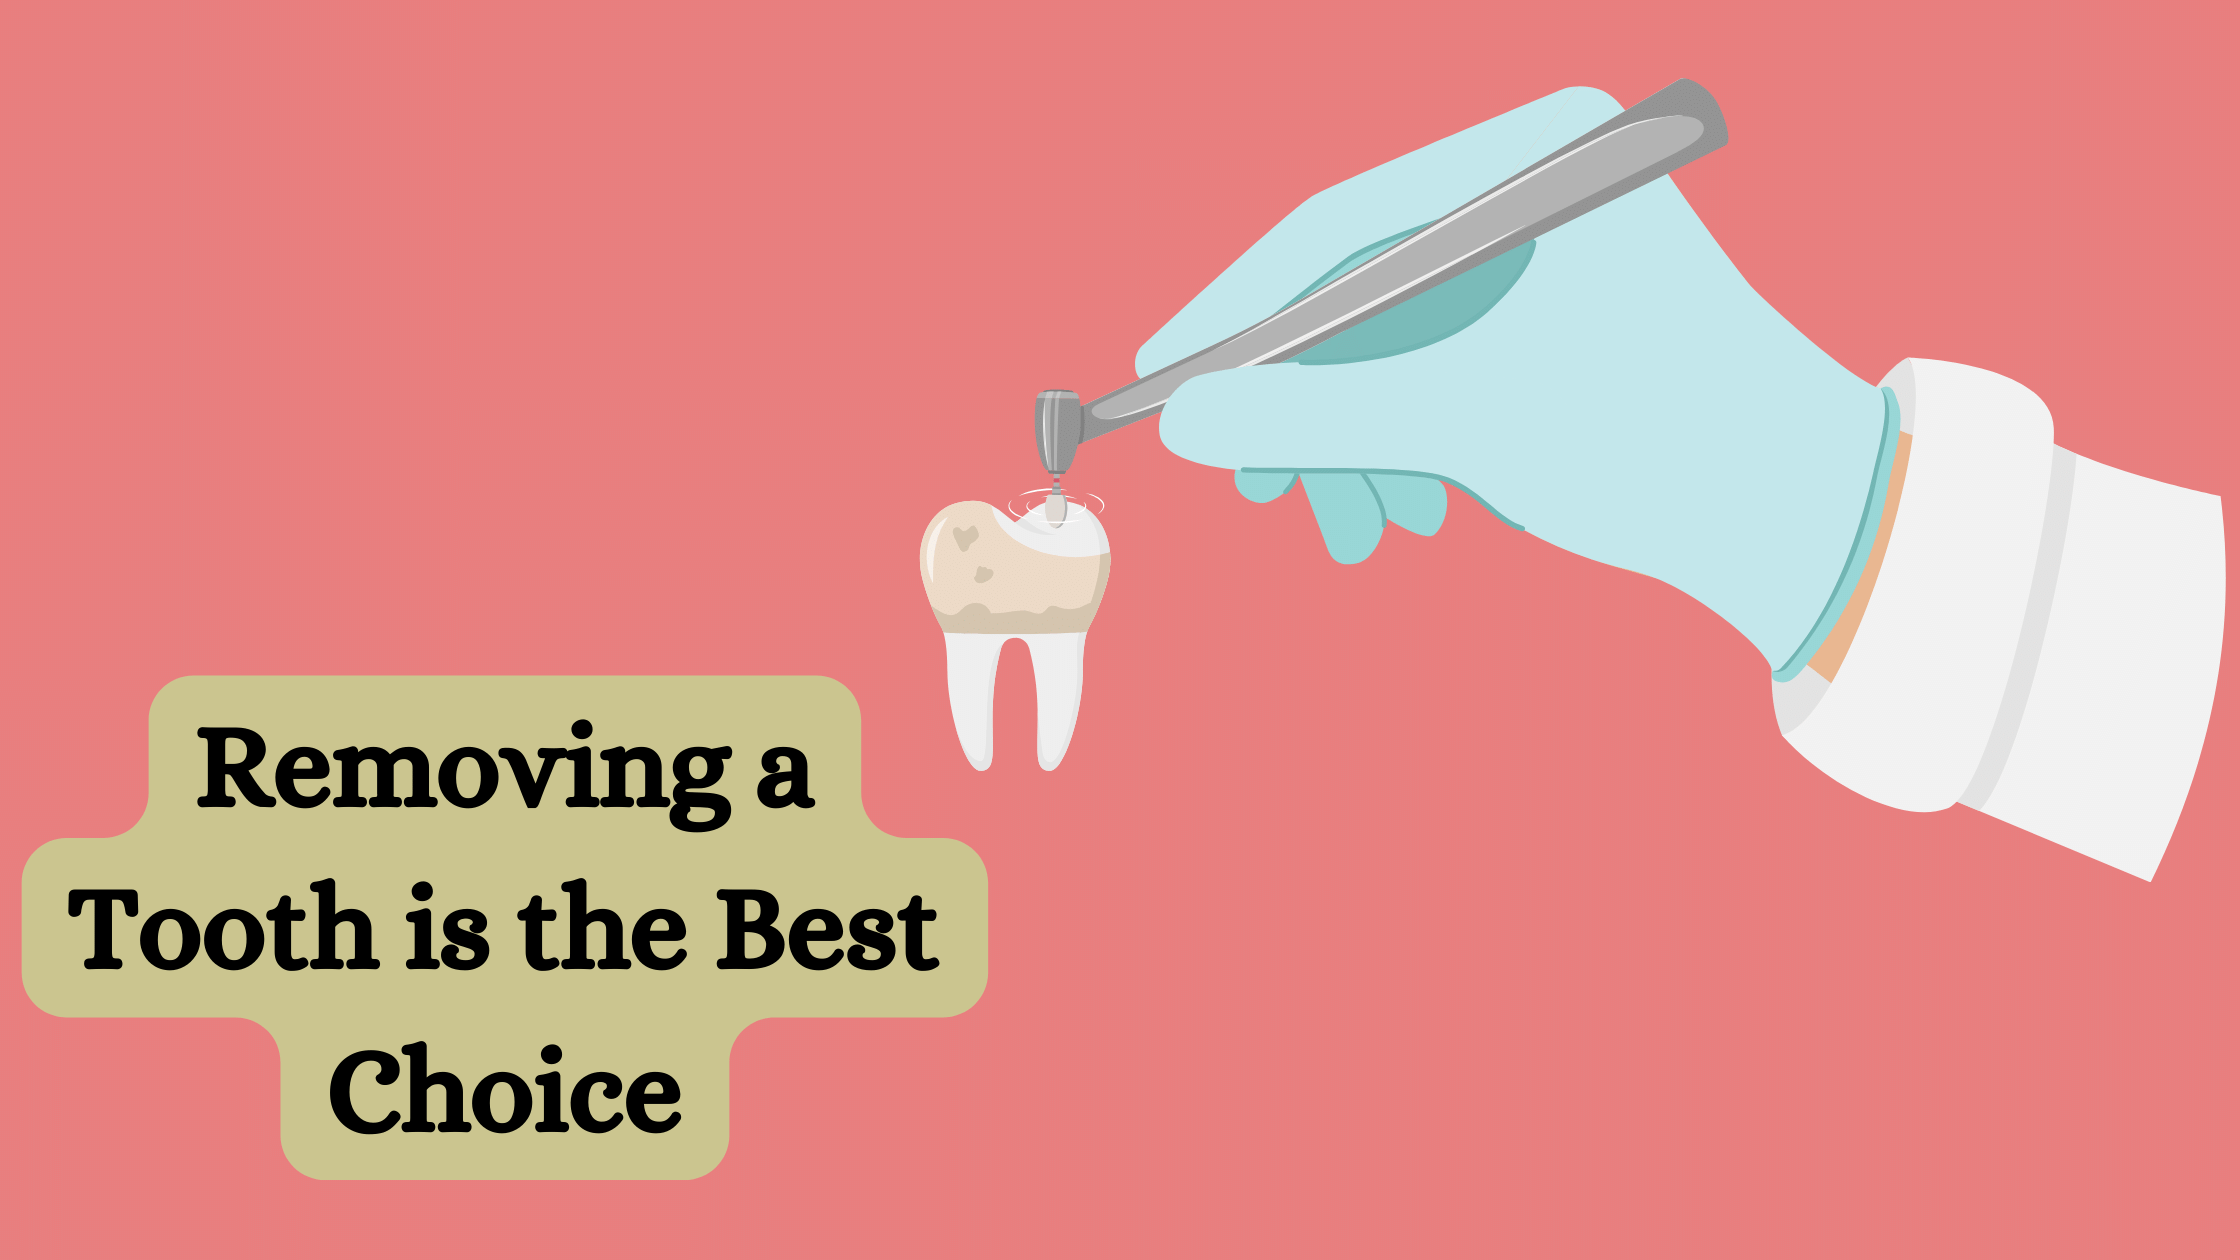 When Removing a Tooth is the Best Choice